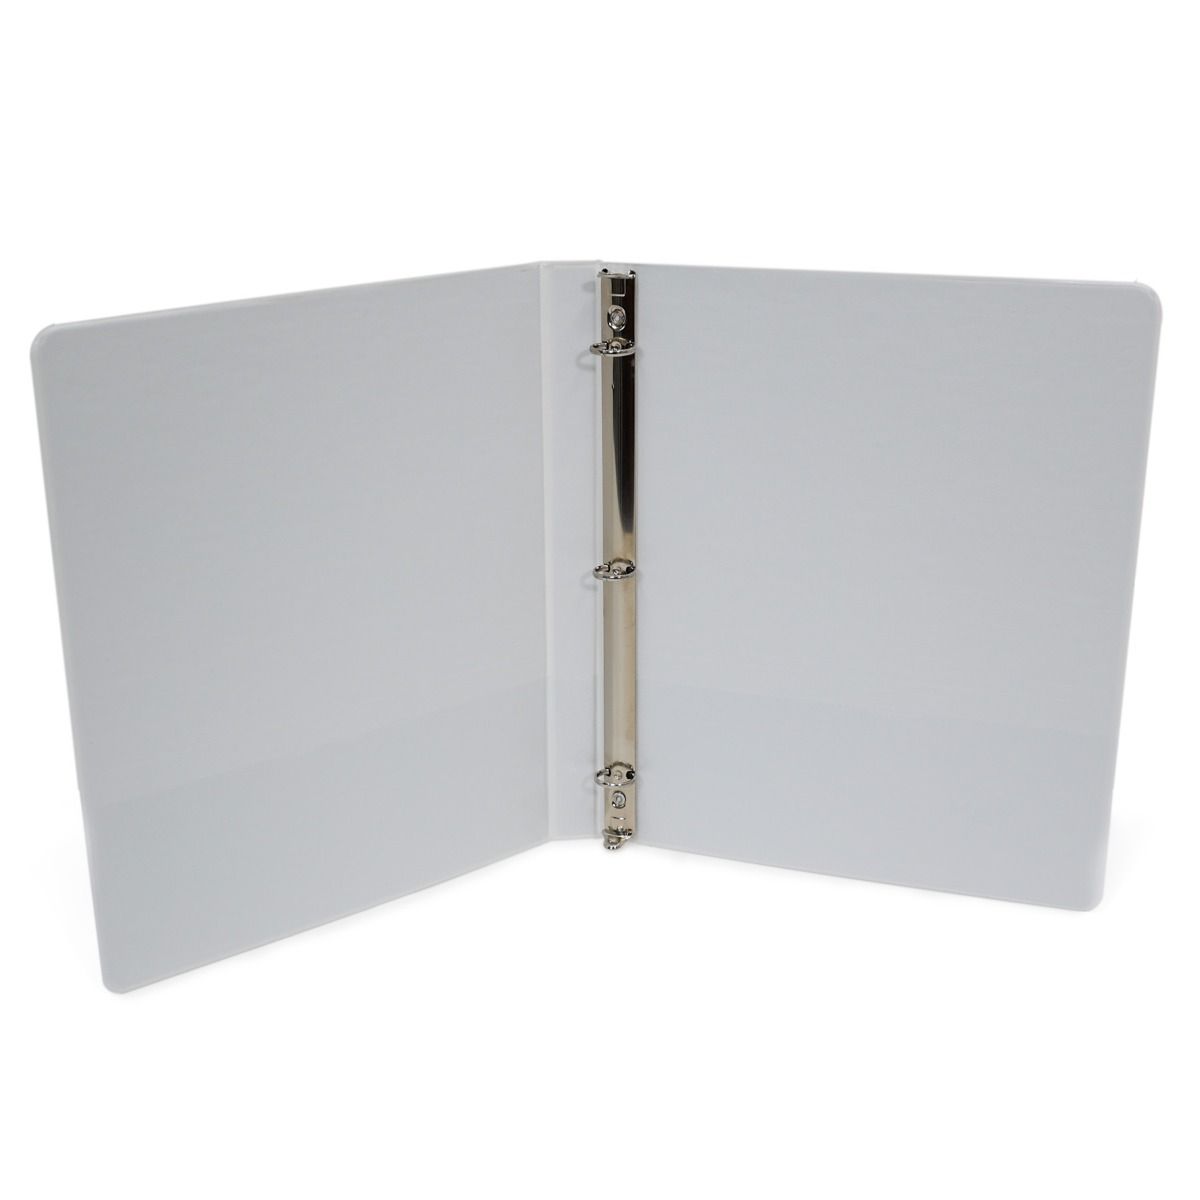 1/2" White Letter Size View Binders Image 1